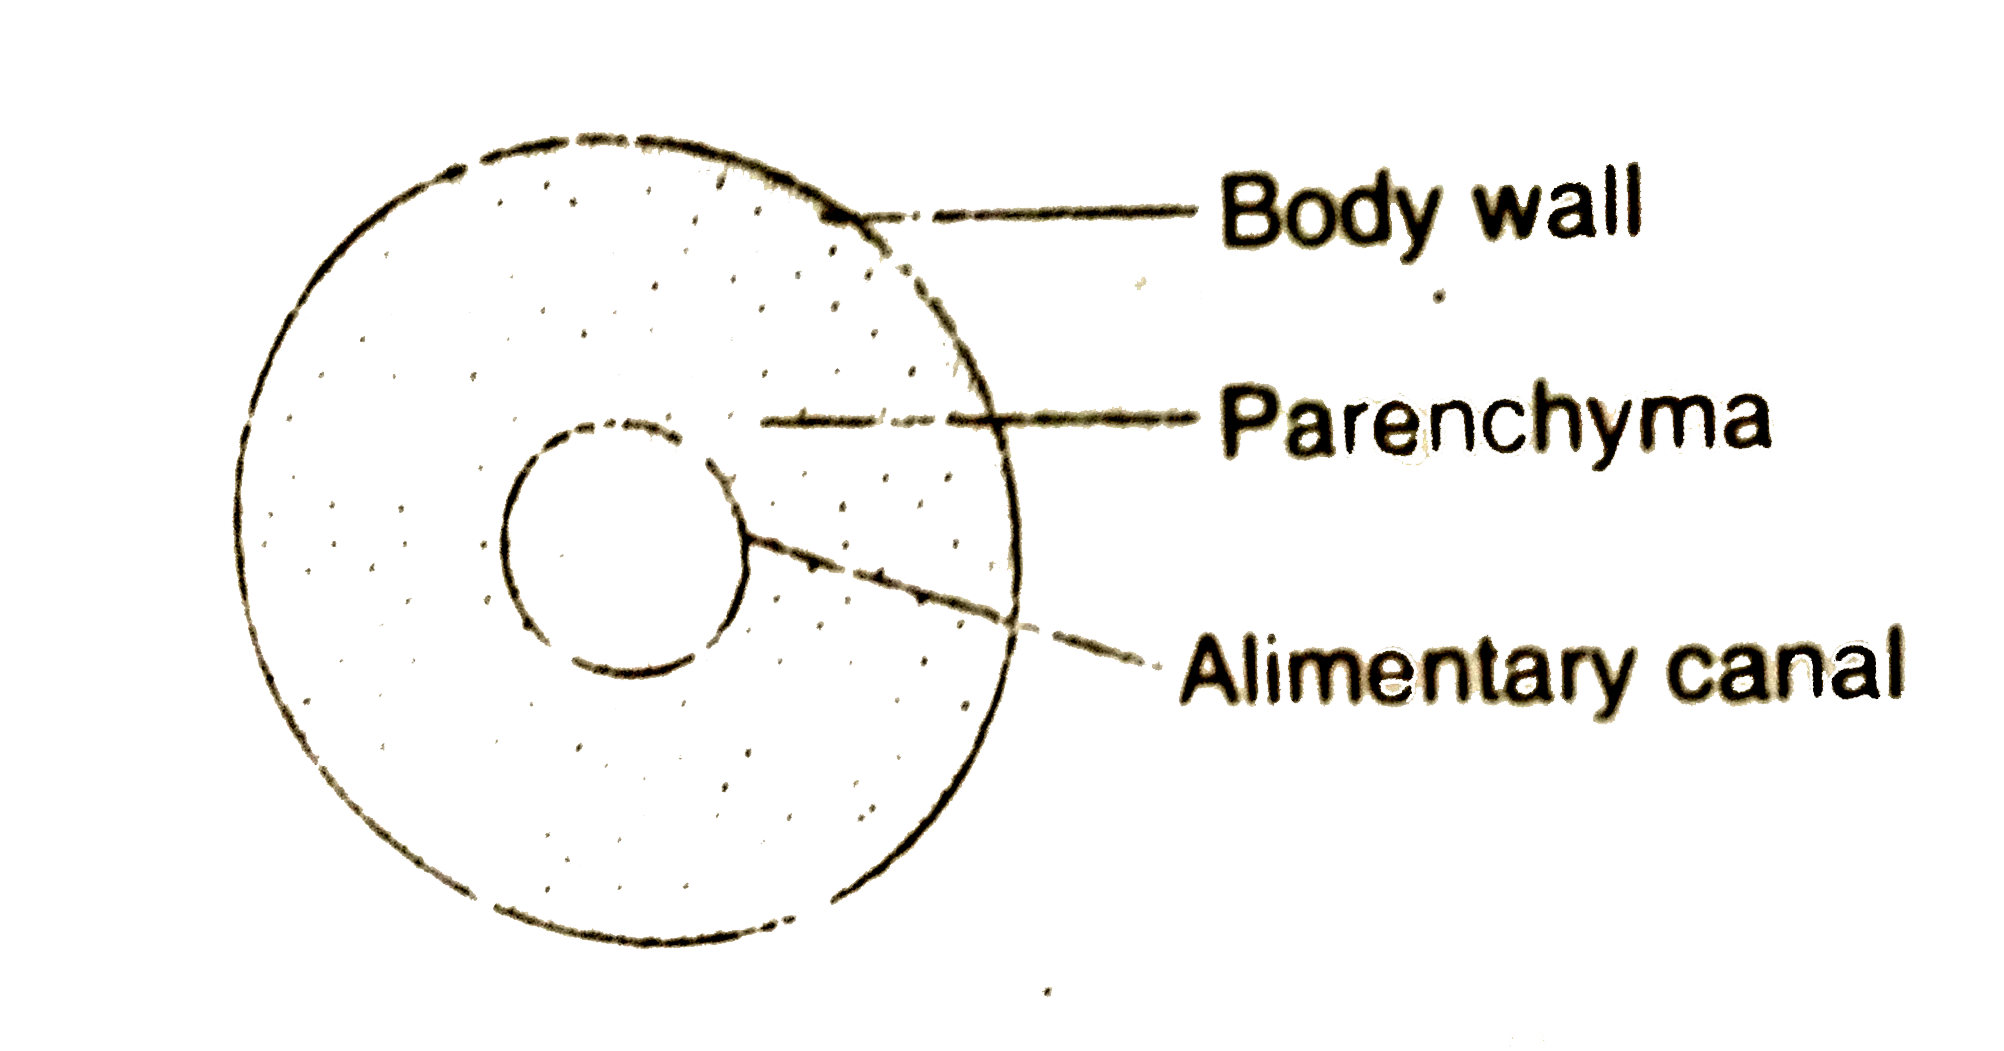 The cross-section of the body of an invertebrate is given below. Identify the animal, which has this body plan.